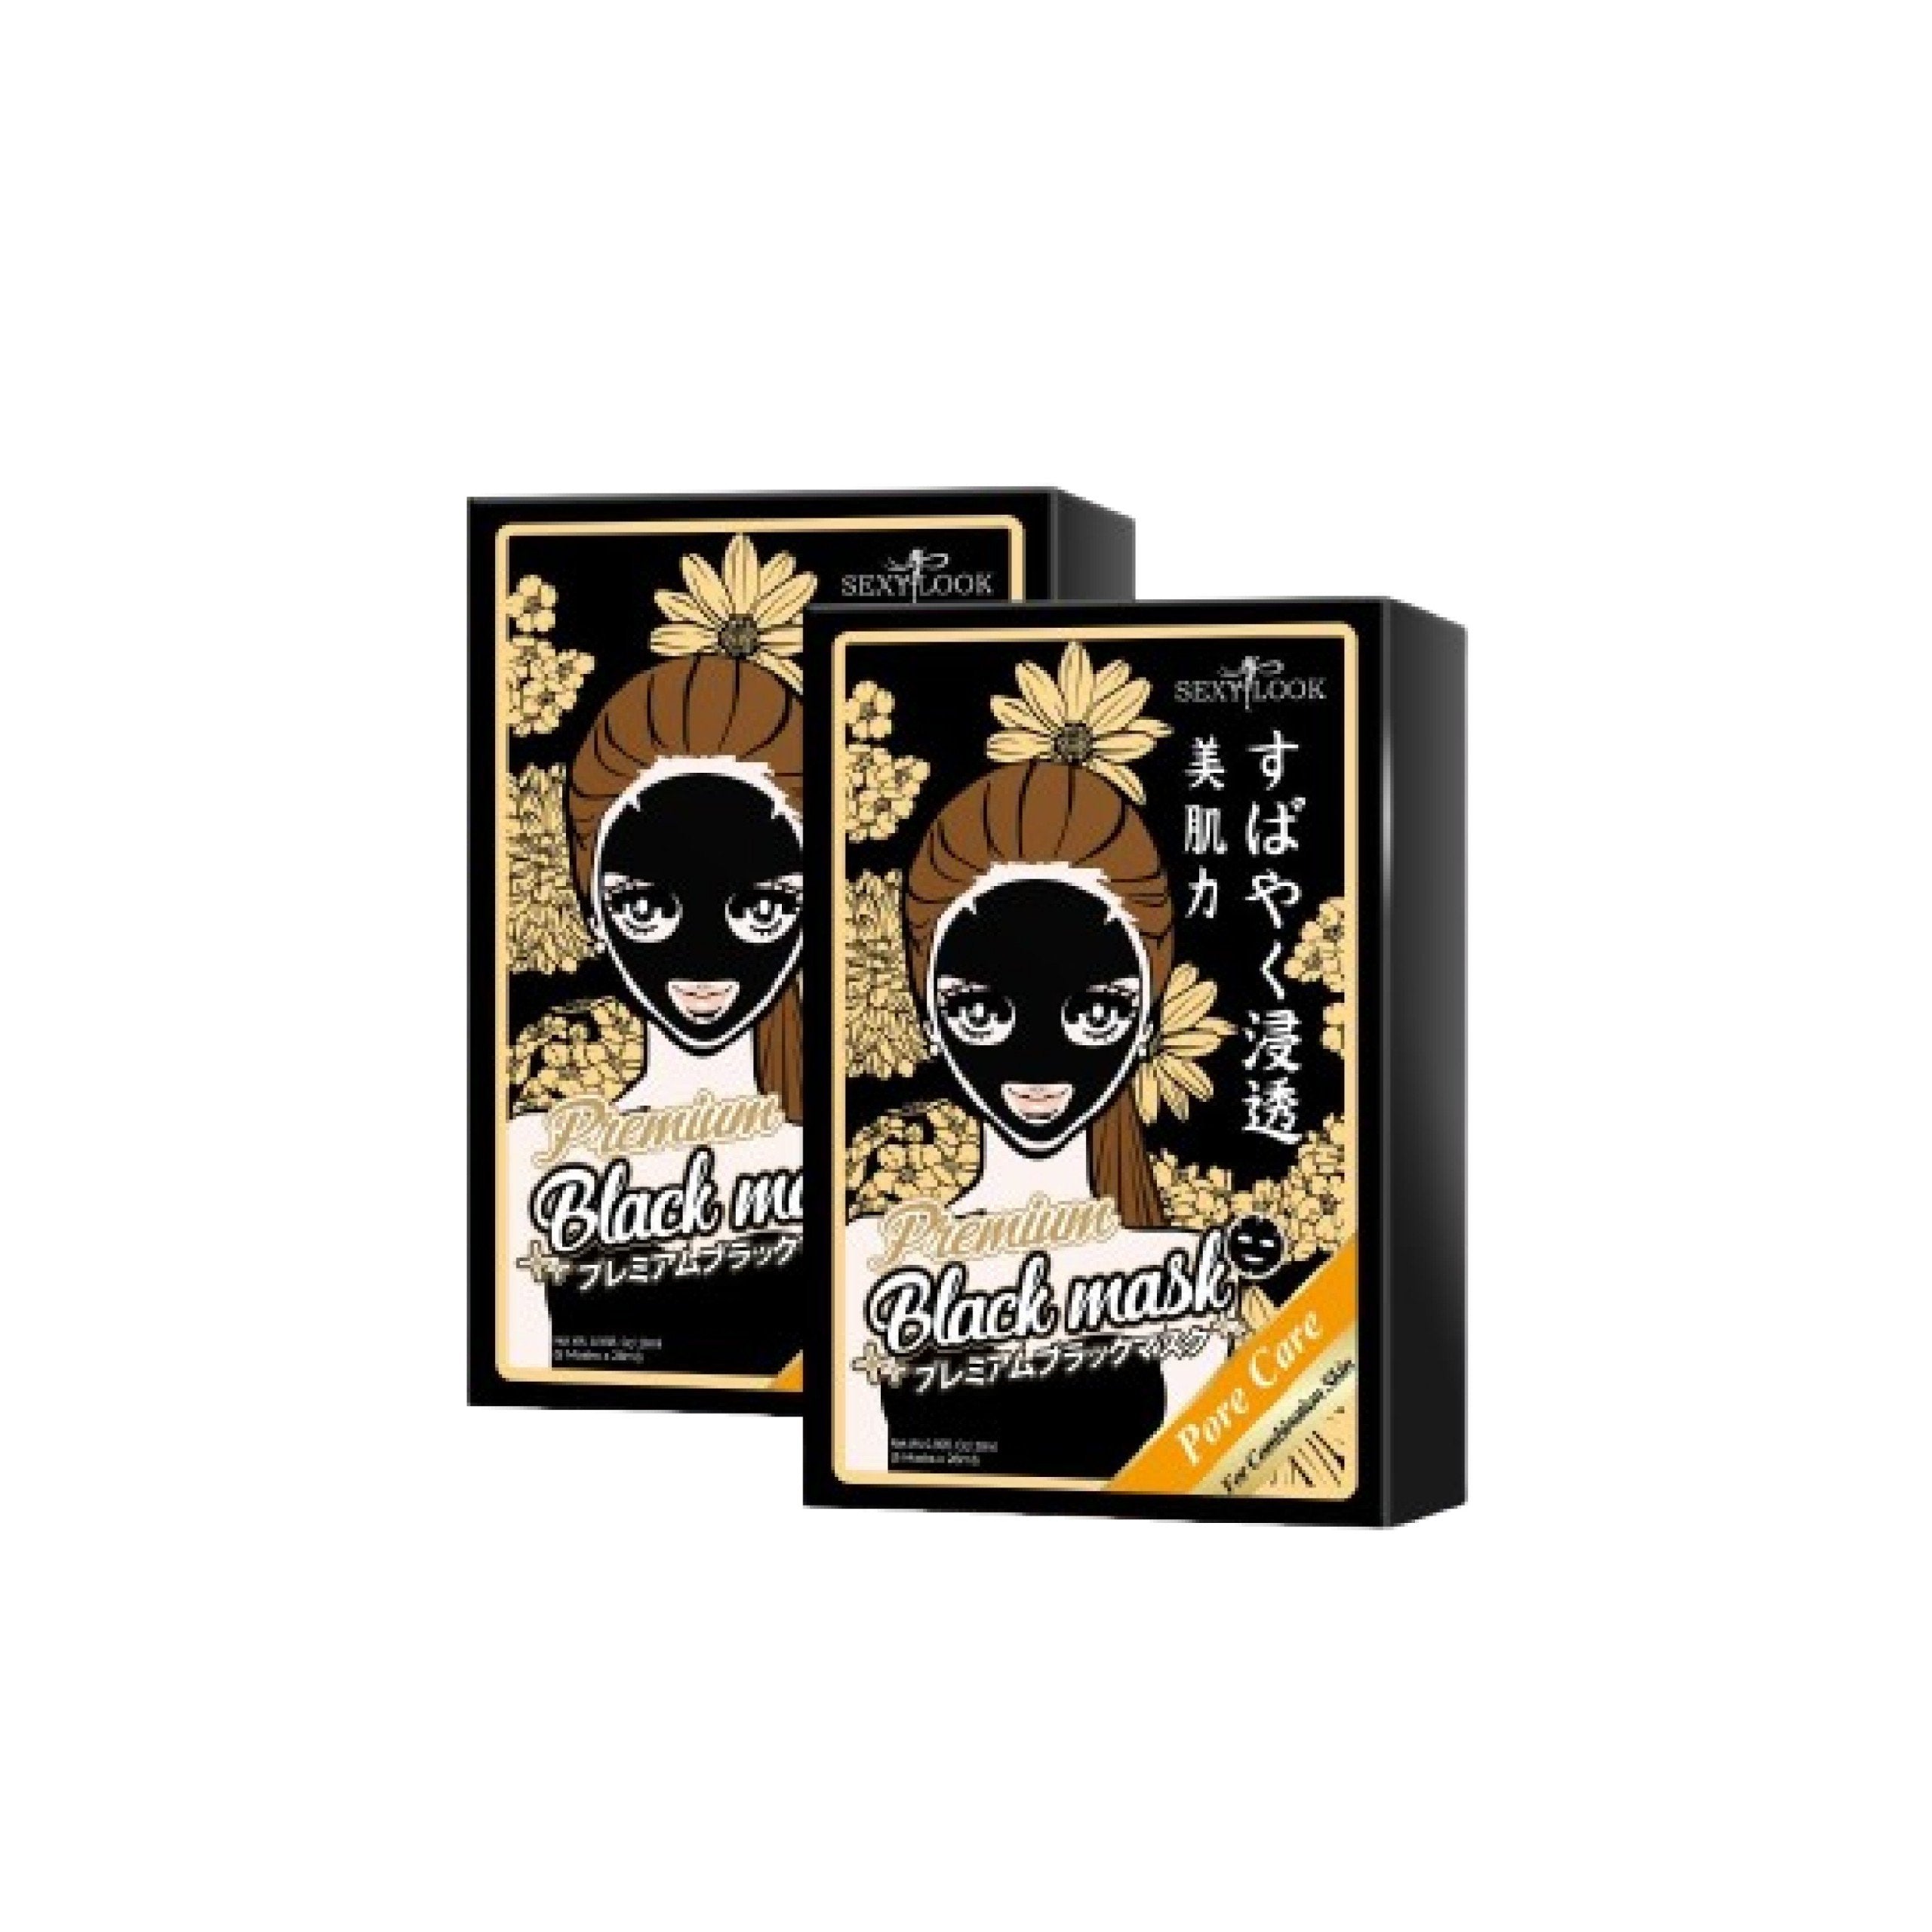 Sexylook Chamomile Black Mask Combo 10 Pieces Supports Acne Reduction and Soothes Skin